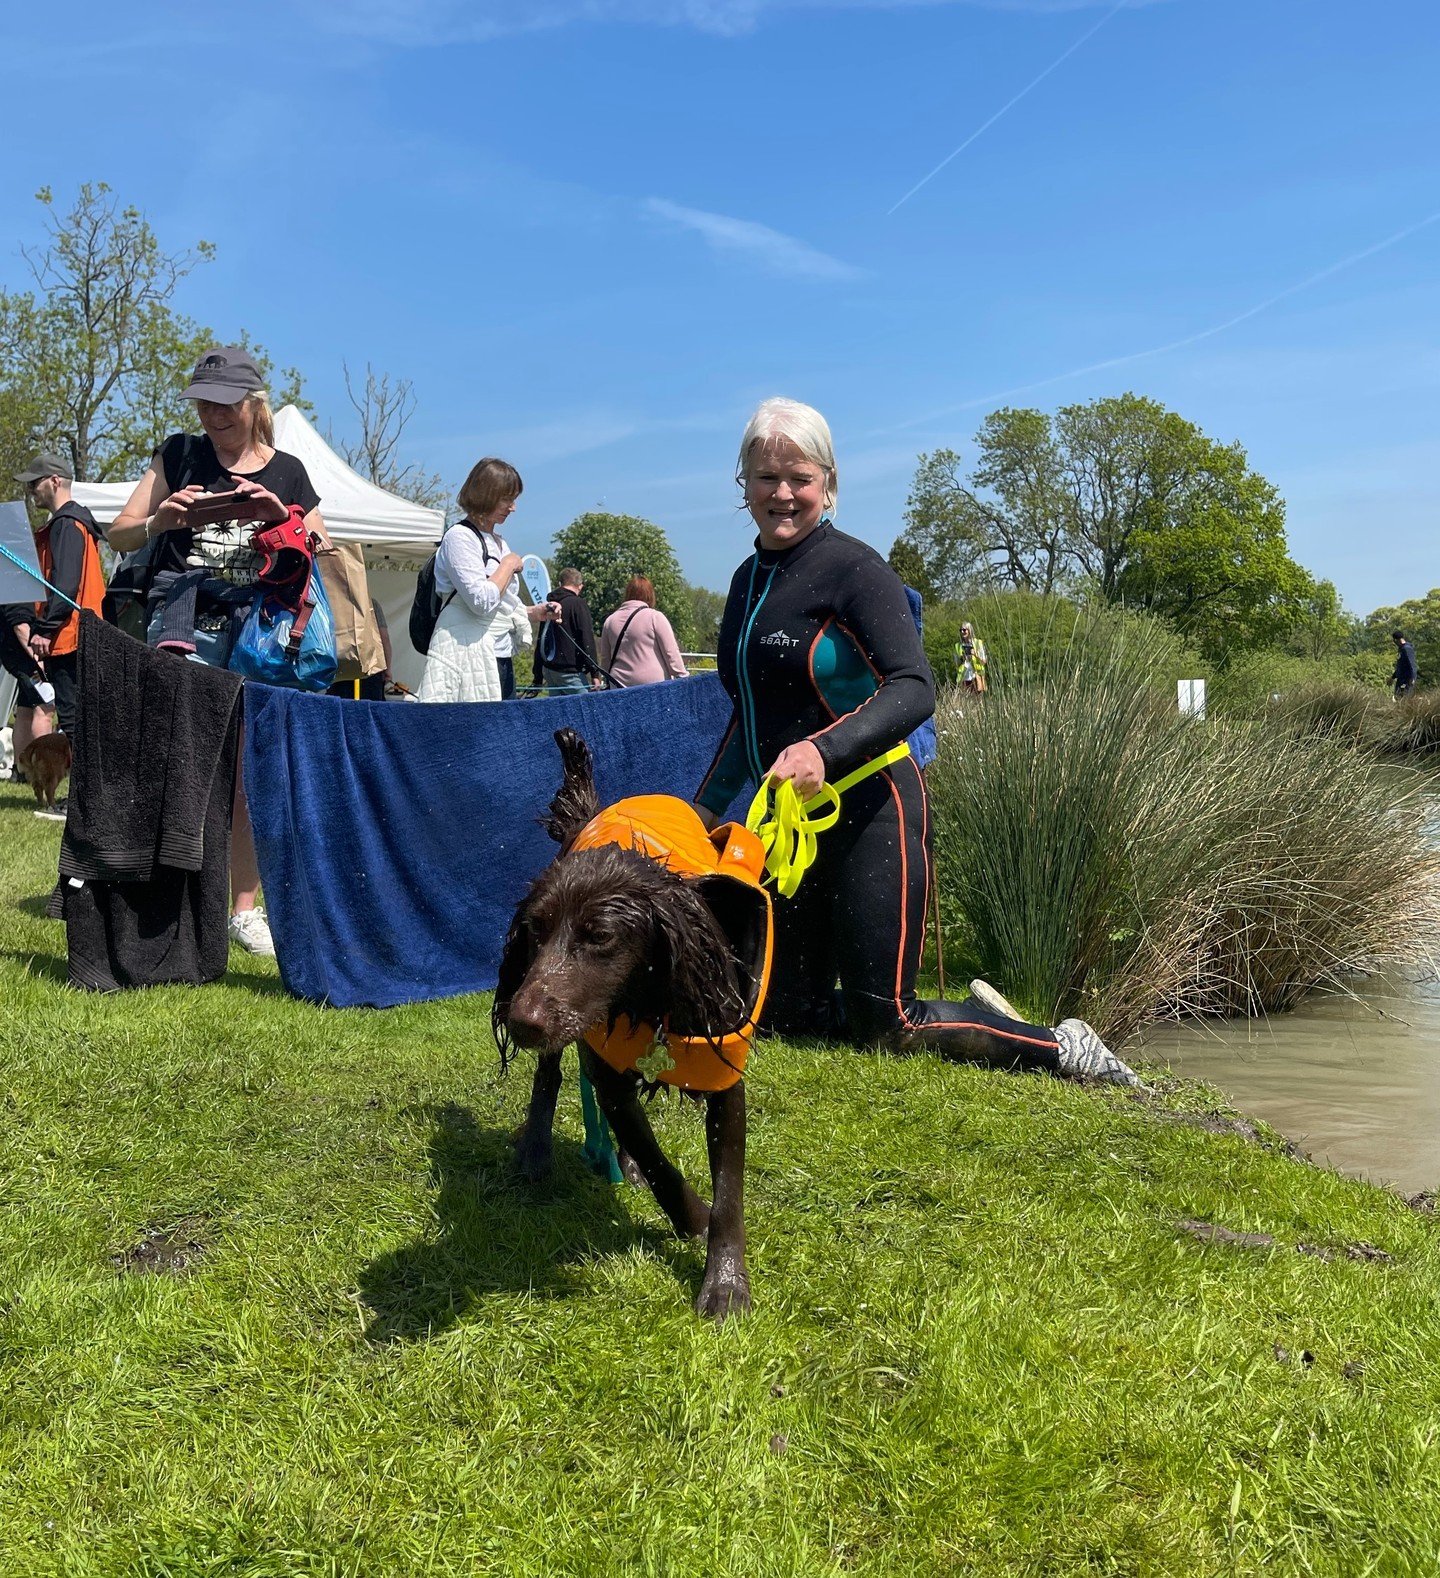 Sue Lloyd of Snazzy Swimmers and the Canine Hydrotherapy pool in Medstead will be up to her waist in pond water, to let your dog have the swim of his or her life!🌊

Our lake is out of bounds to other dogs but book in with Sue and she will put a safe